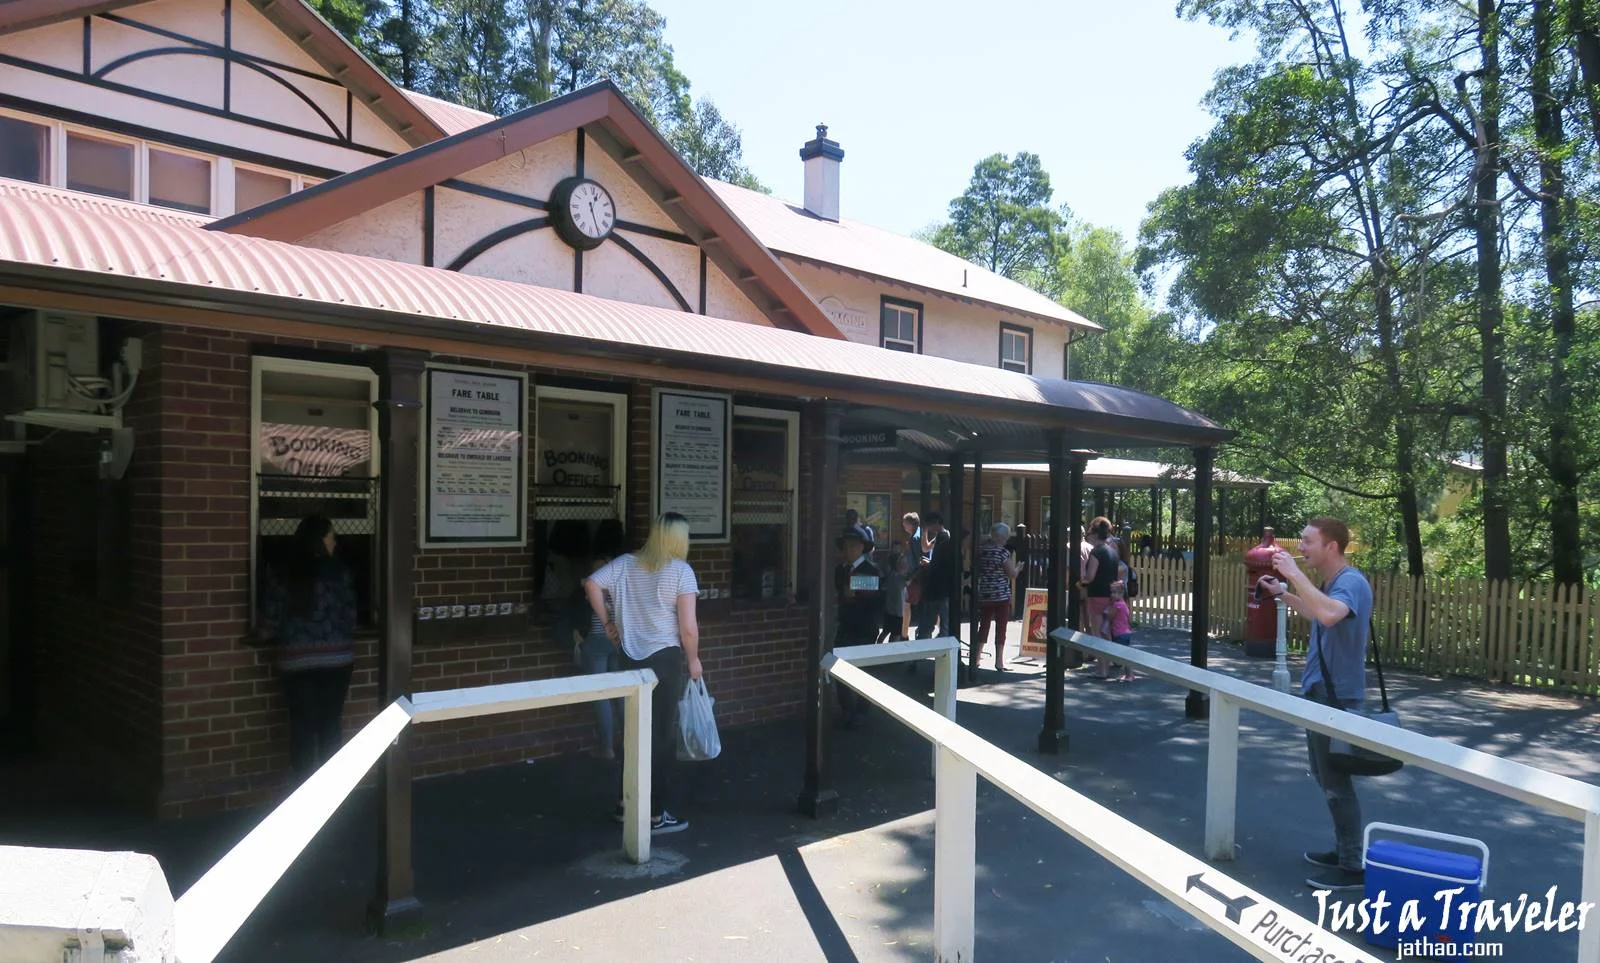 Melbourne-Puffing-Billy-Railway-steam-trains-tickets-prices-tour-timetable-map-lakeside-station